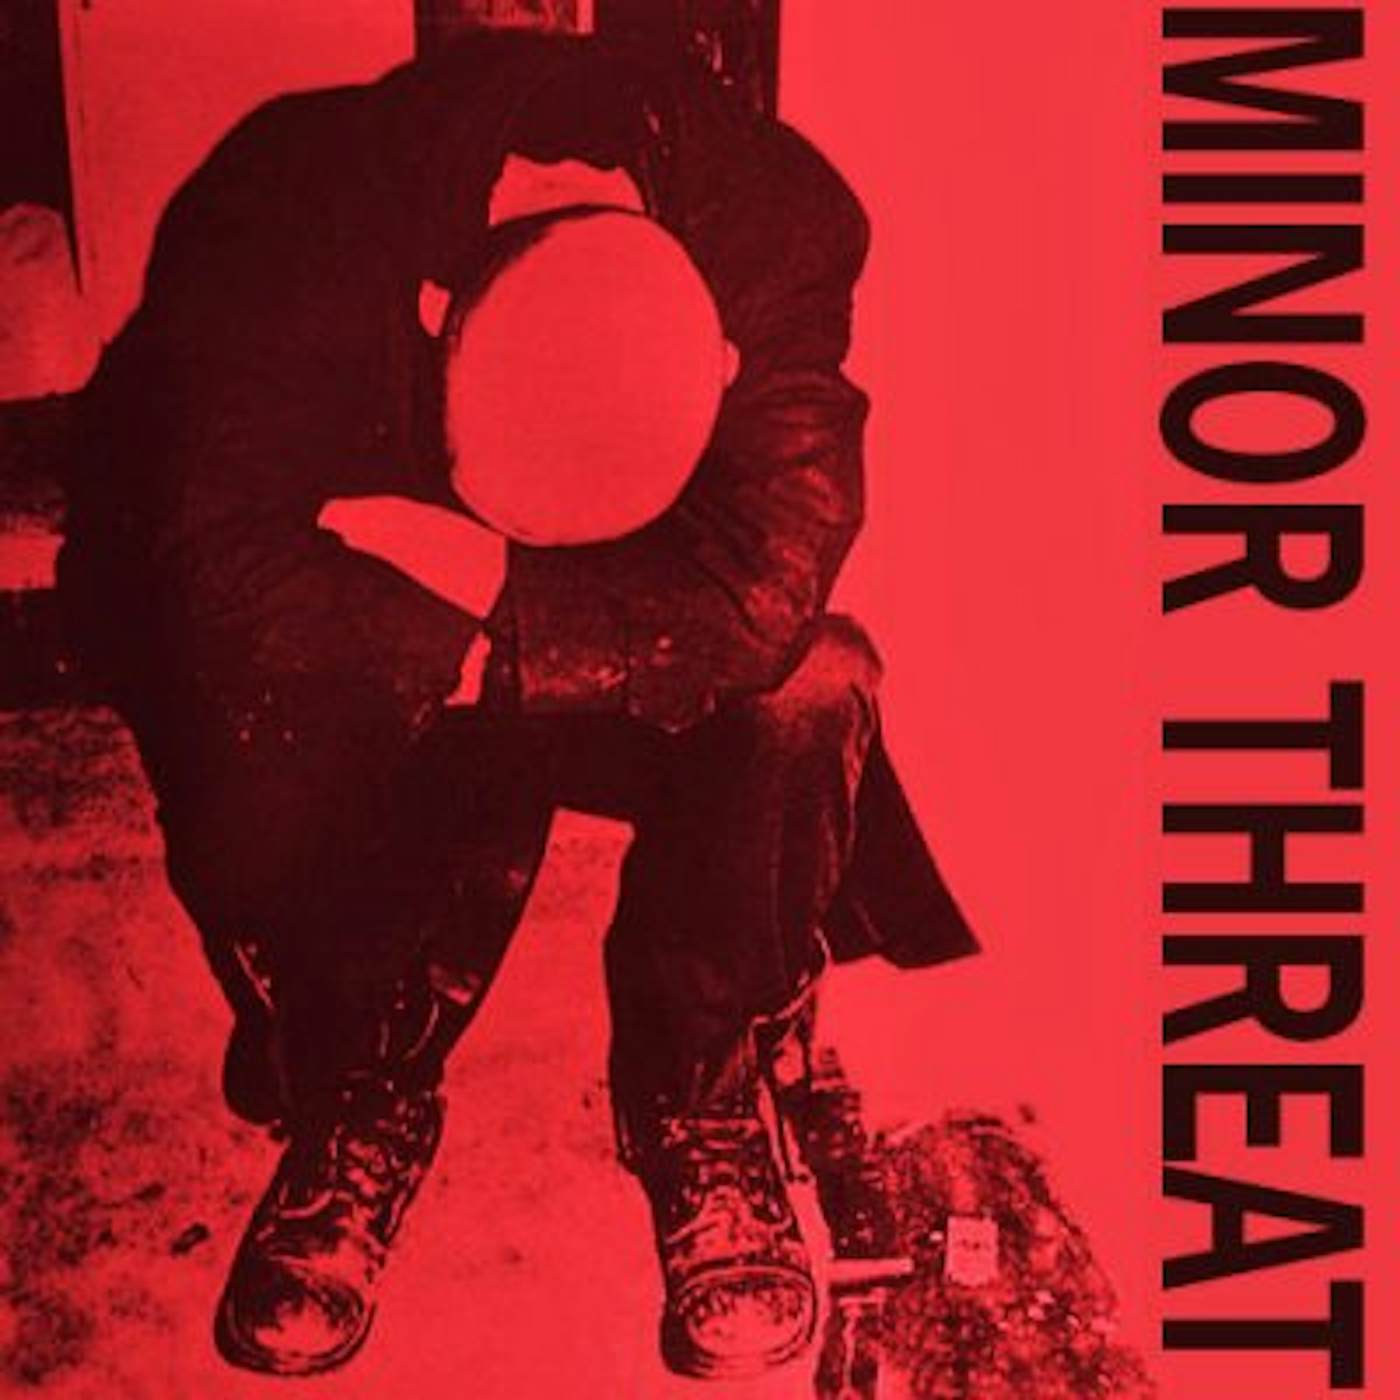 Minor Threat COMPLETE DISCOGRAPHY CD